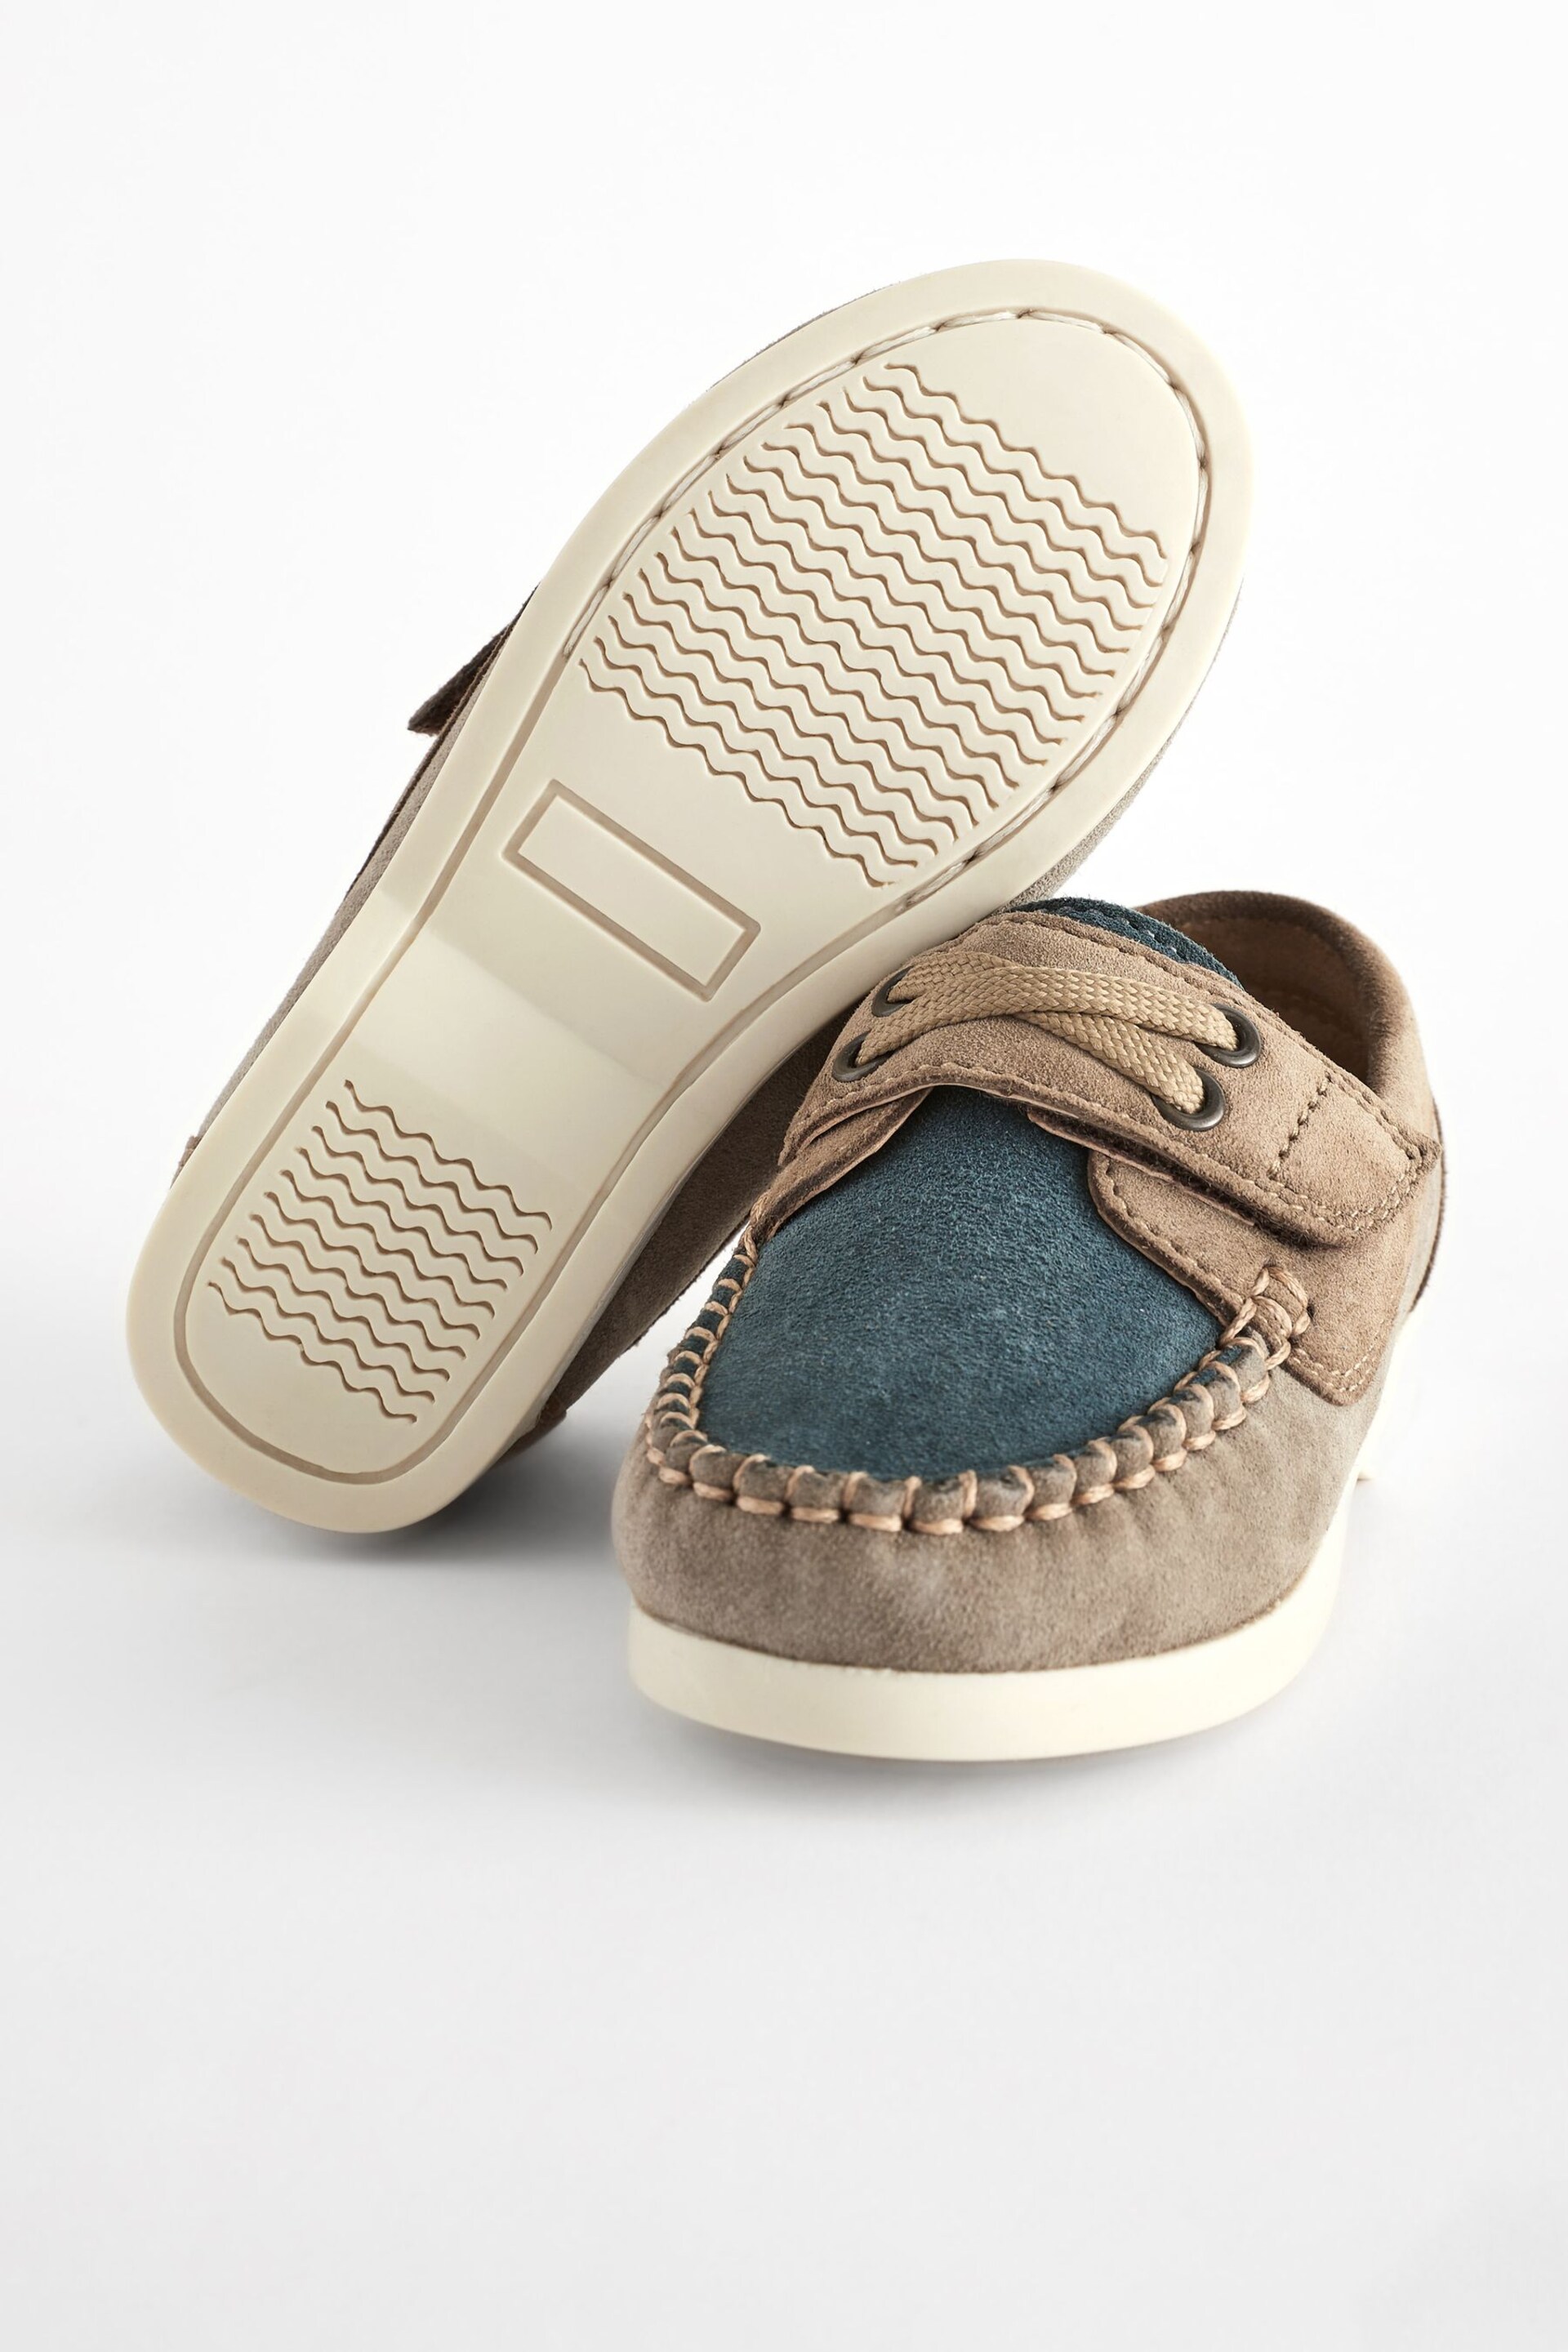 Stone/Mineral Blue Leather Boat Shoes - Image 4 of 5